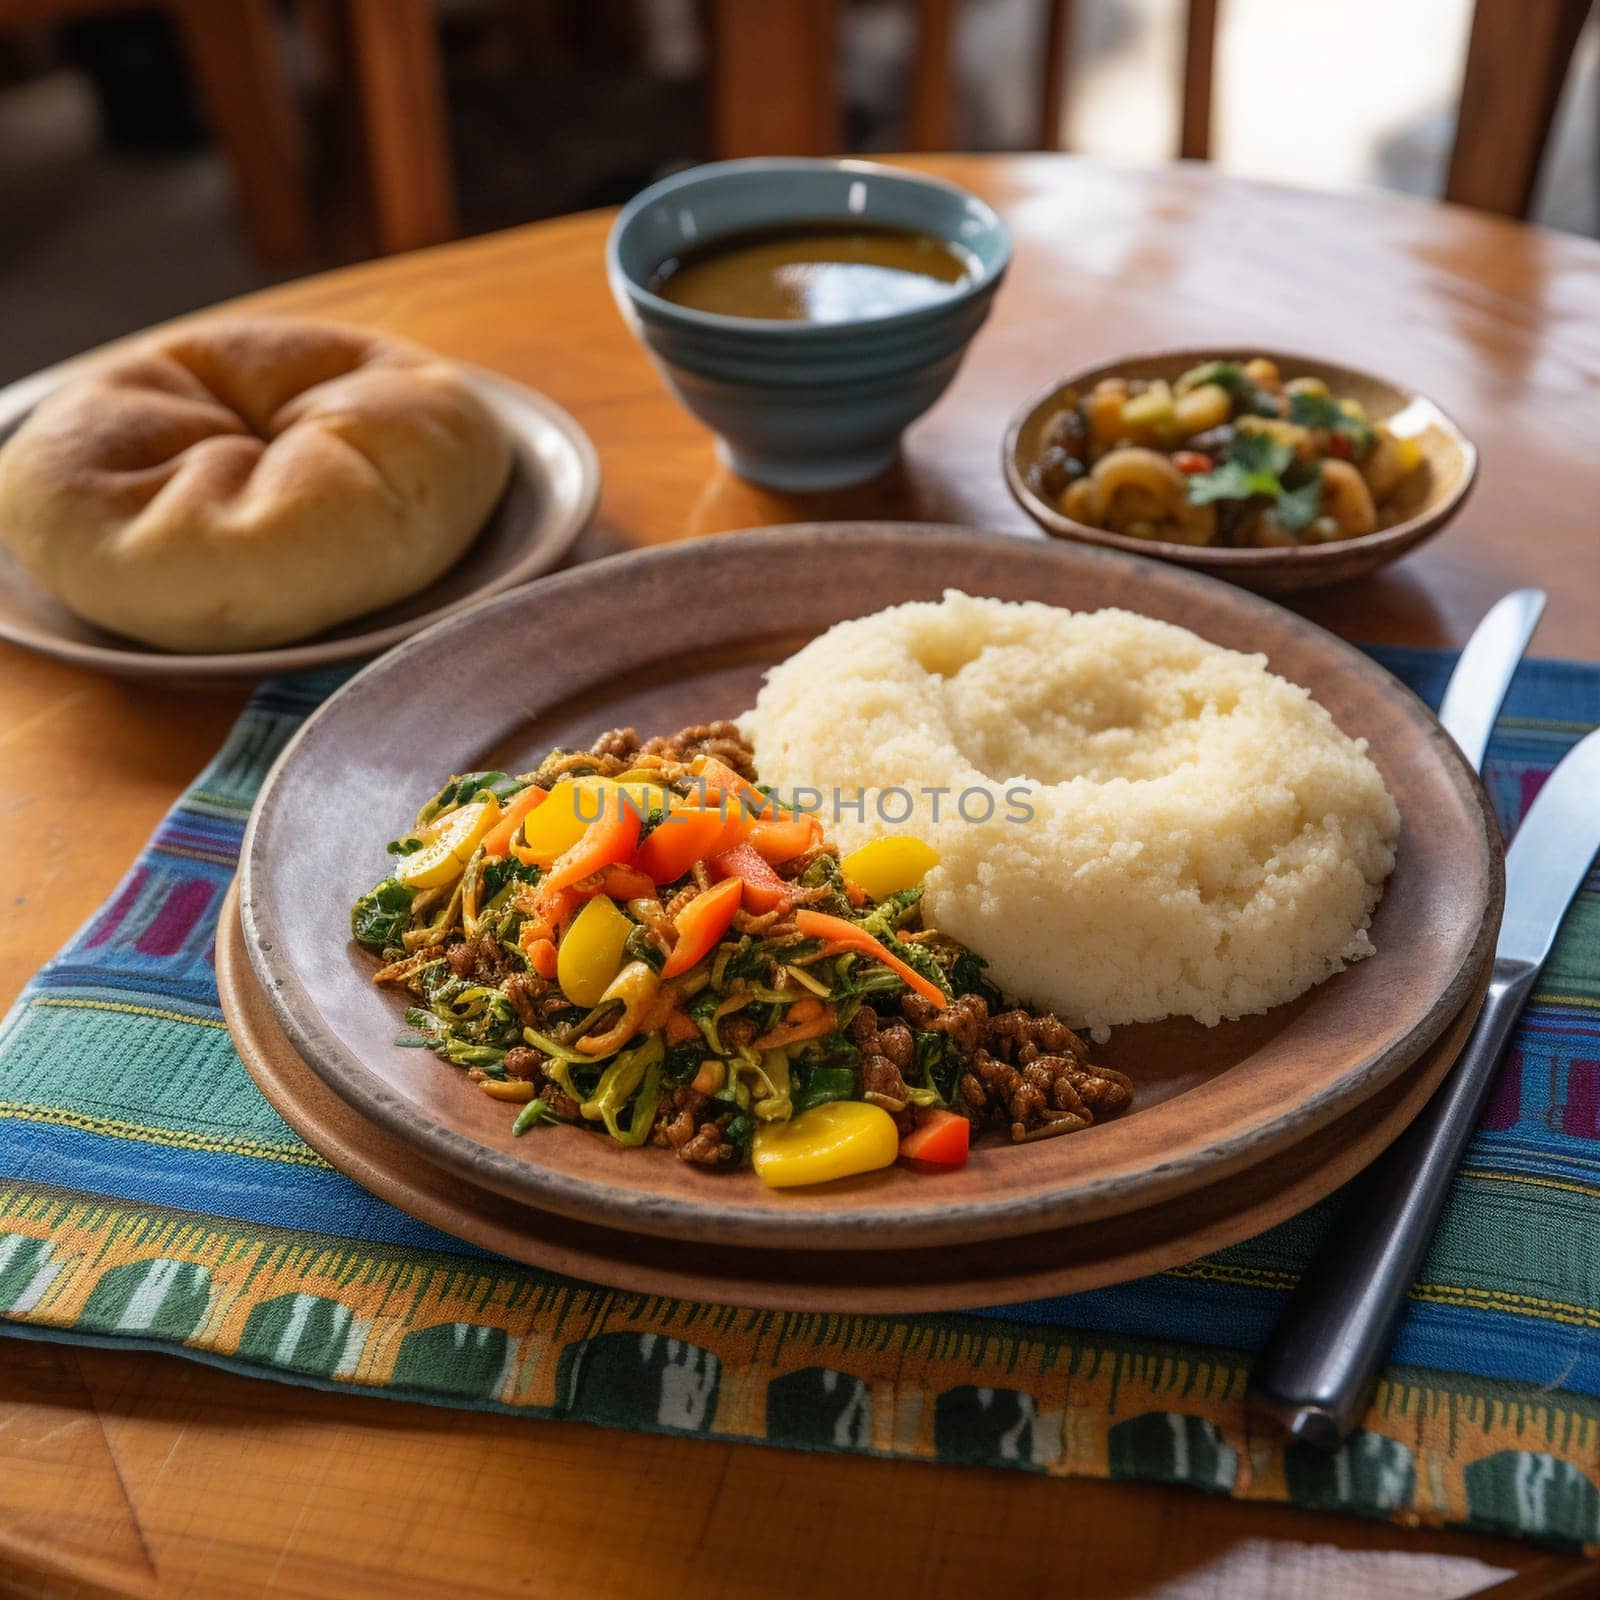 Indulge in the flavors of Tanzania with this hearty and satisfying plate of Ugali, a thick cornmeal porridge, served alongside a colorful vegetable stew. The image is captured from a 45-degree angle, with the plate of Ugali as the main focus, and traditional Tanzanian utensils, such as a wooden spoon and fork, and a side of vegetable stew in the background. The framing is tight, highlighting the colors and textures of the dish. The lighting is soft and natural, casting a warm glow on one side of the image, creating a cozy atmosphere and highlighting the colors and textures of the Ugali and vegetable stew. The emotions evoked by this image are warmth, comfort, and simplicity, inviting the viewer to enjoy a hearty and satisfying meal. The image emphasizes the textures of the thick and hearty Ugali, as well as the bright colors of the vegetable stew. The use of traditional Tanzanian ingredients, such as beans, tomatoes, and onions, is mentioned to add more visual interest and showcase the unique flavors of the dish.